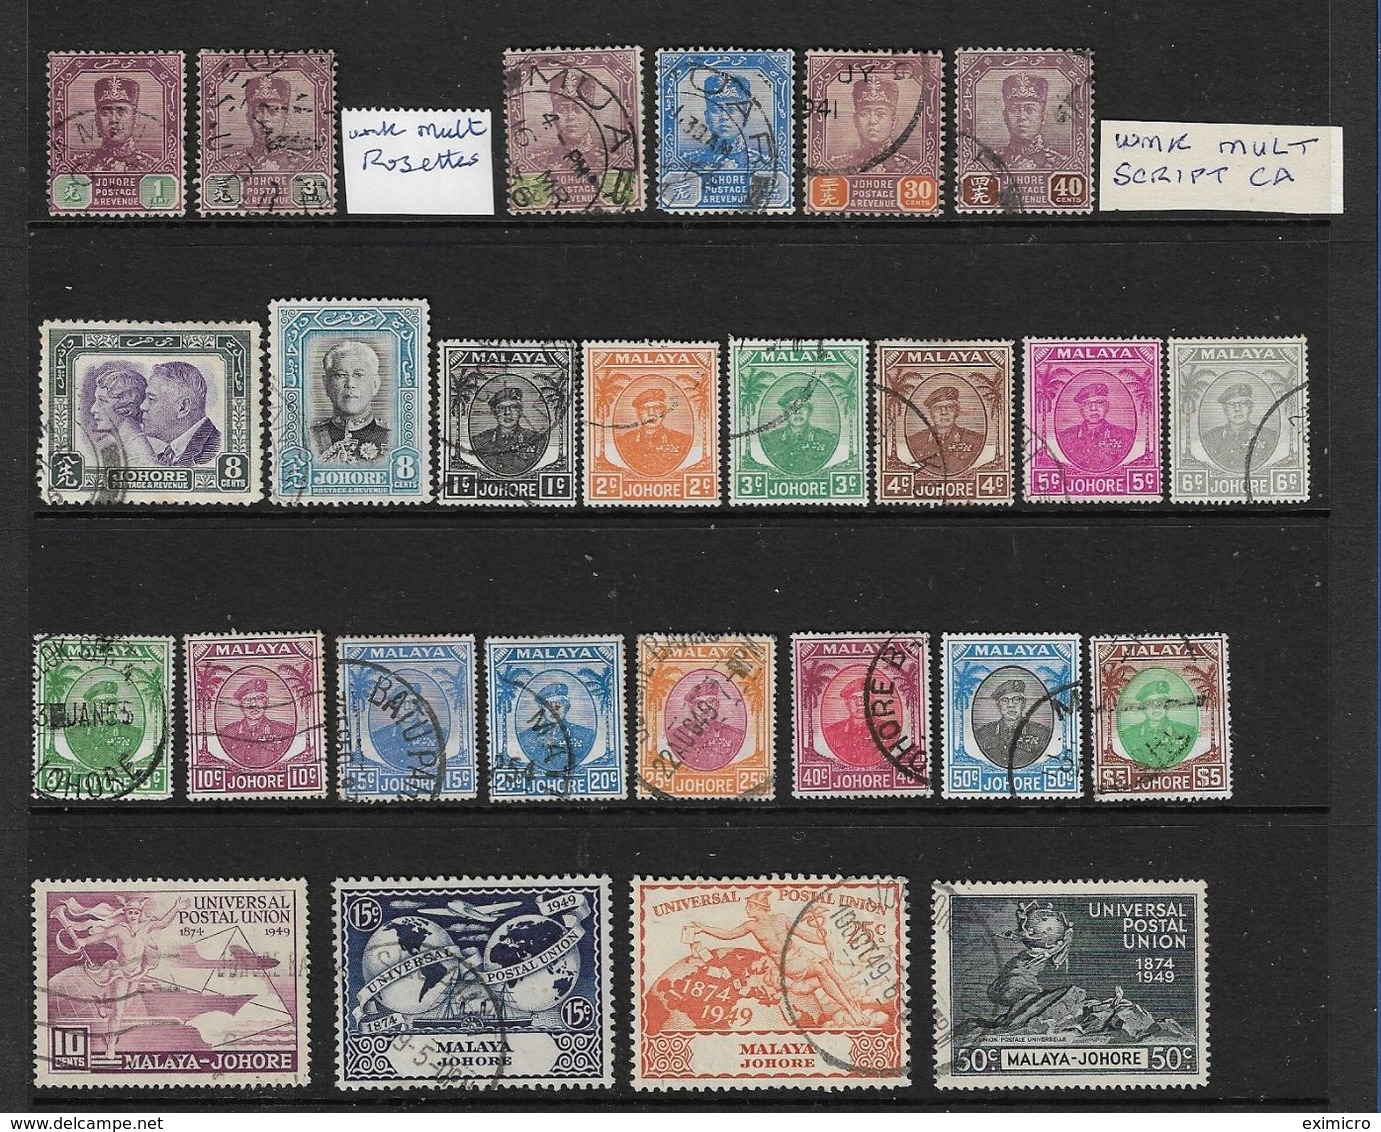 MALAYA - JOHORE 1912 - 1952 FINE USED COLLECTION OF SETS, TOP VALUES AND KEY VALUES FINE USED Cat £97+ - Johore